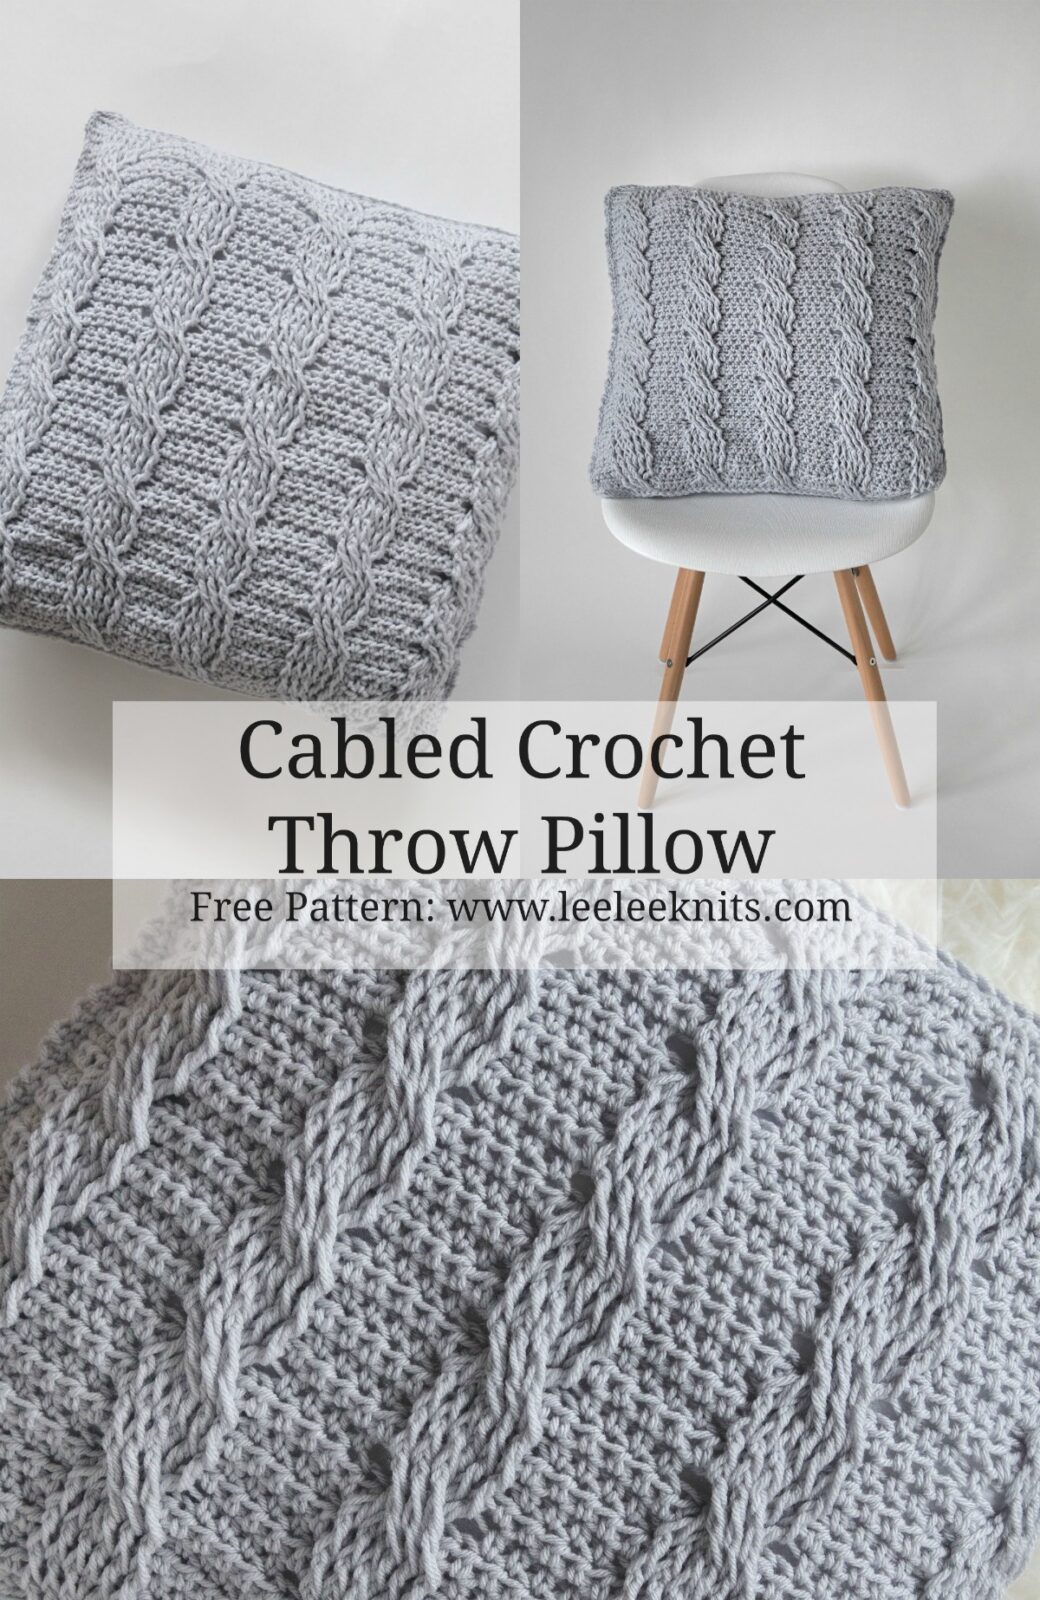 5 Little Monsters: Cable Loop Crocheted Pillow